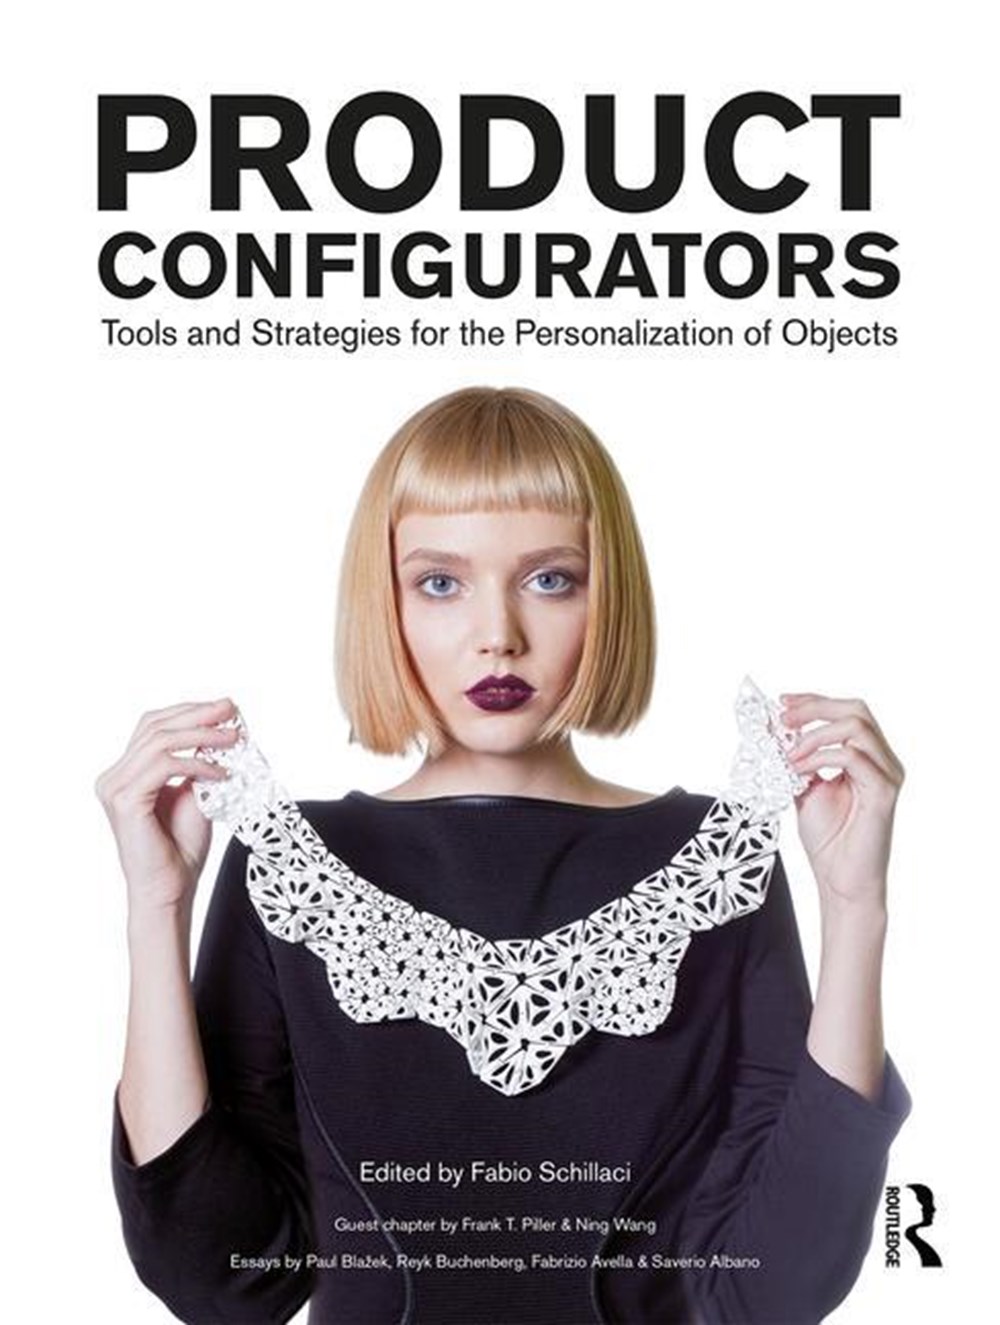 Product Configurators: Tools and Strategies for the Personalization of Objects